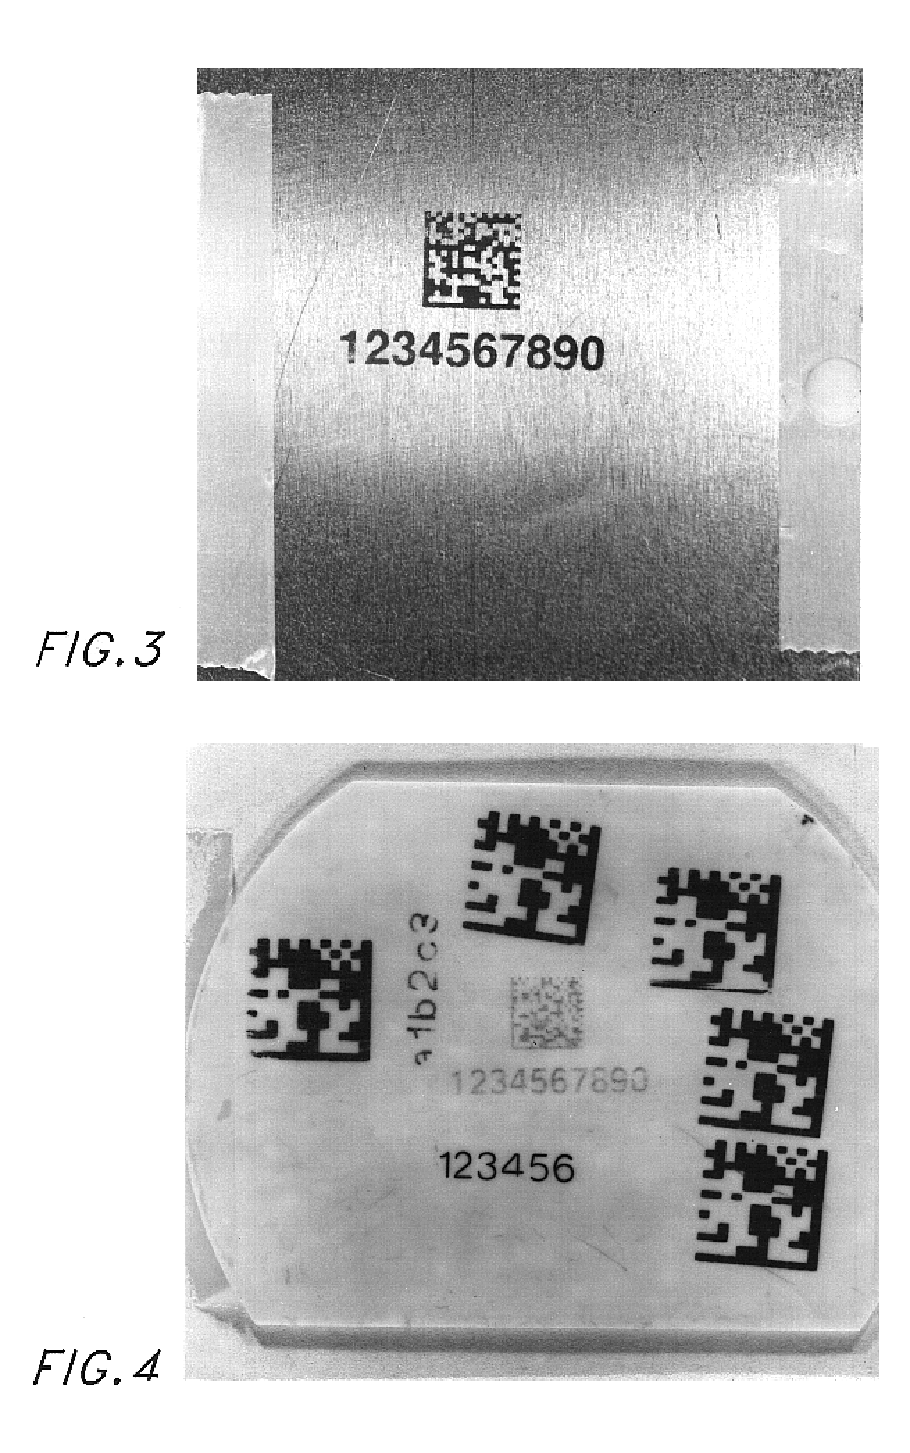 High contrast surface marking using irradiation of electrostatically applied marking materials